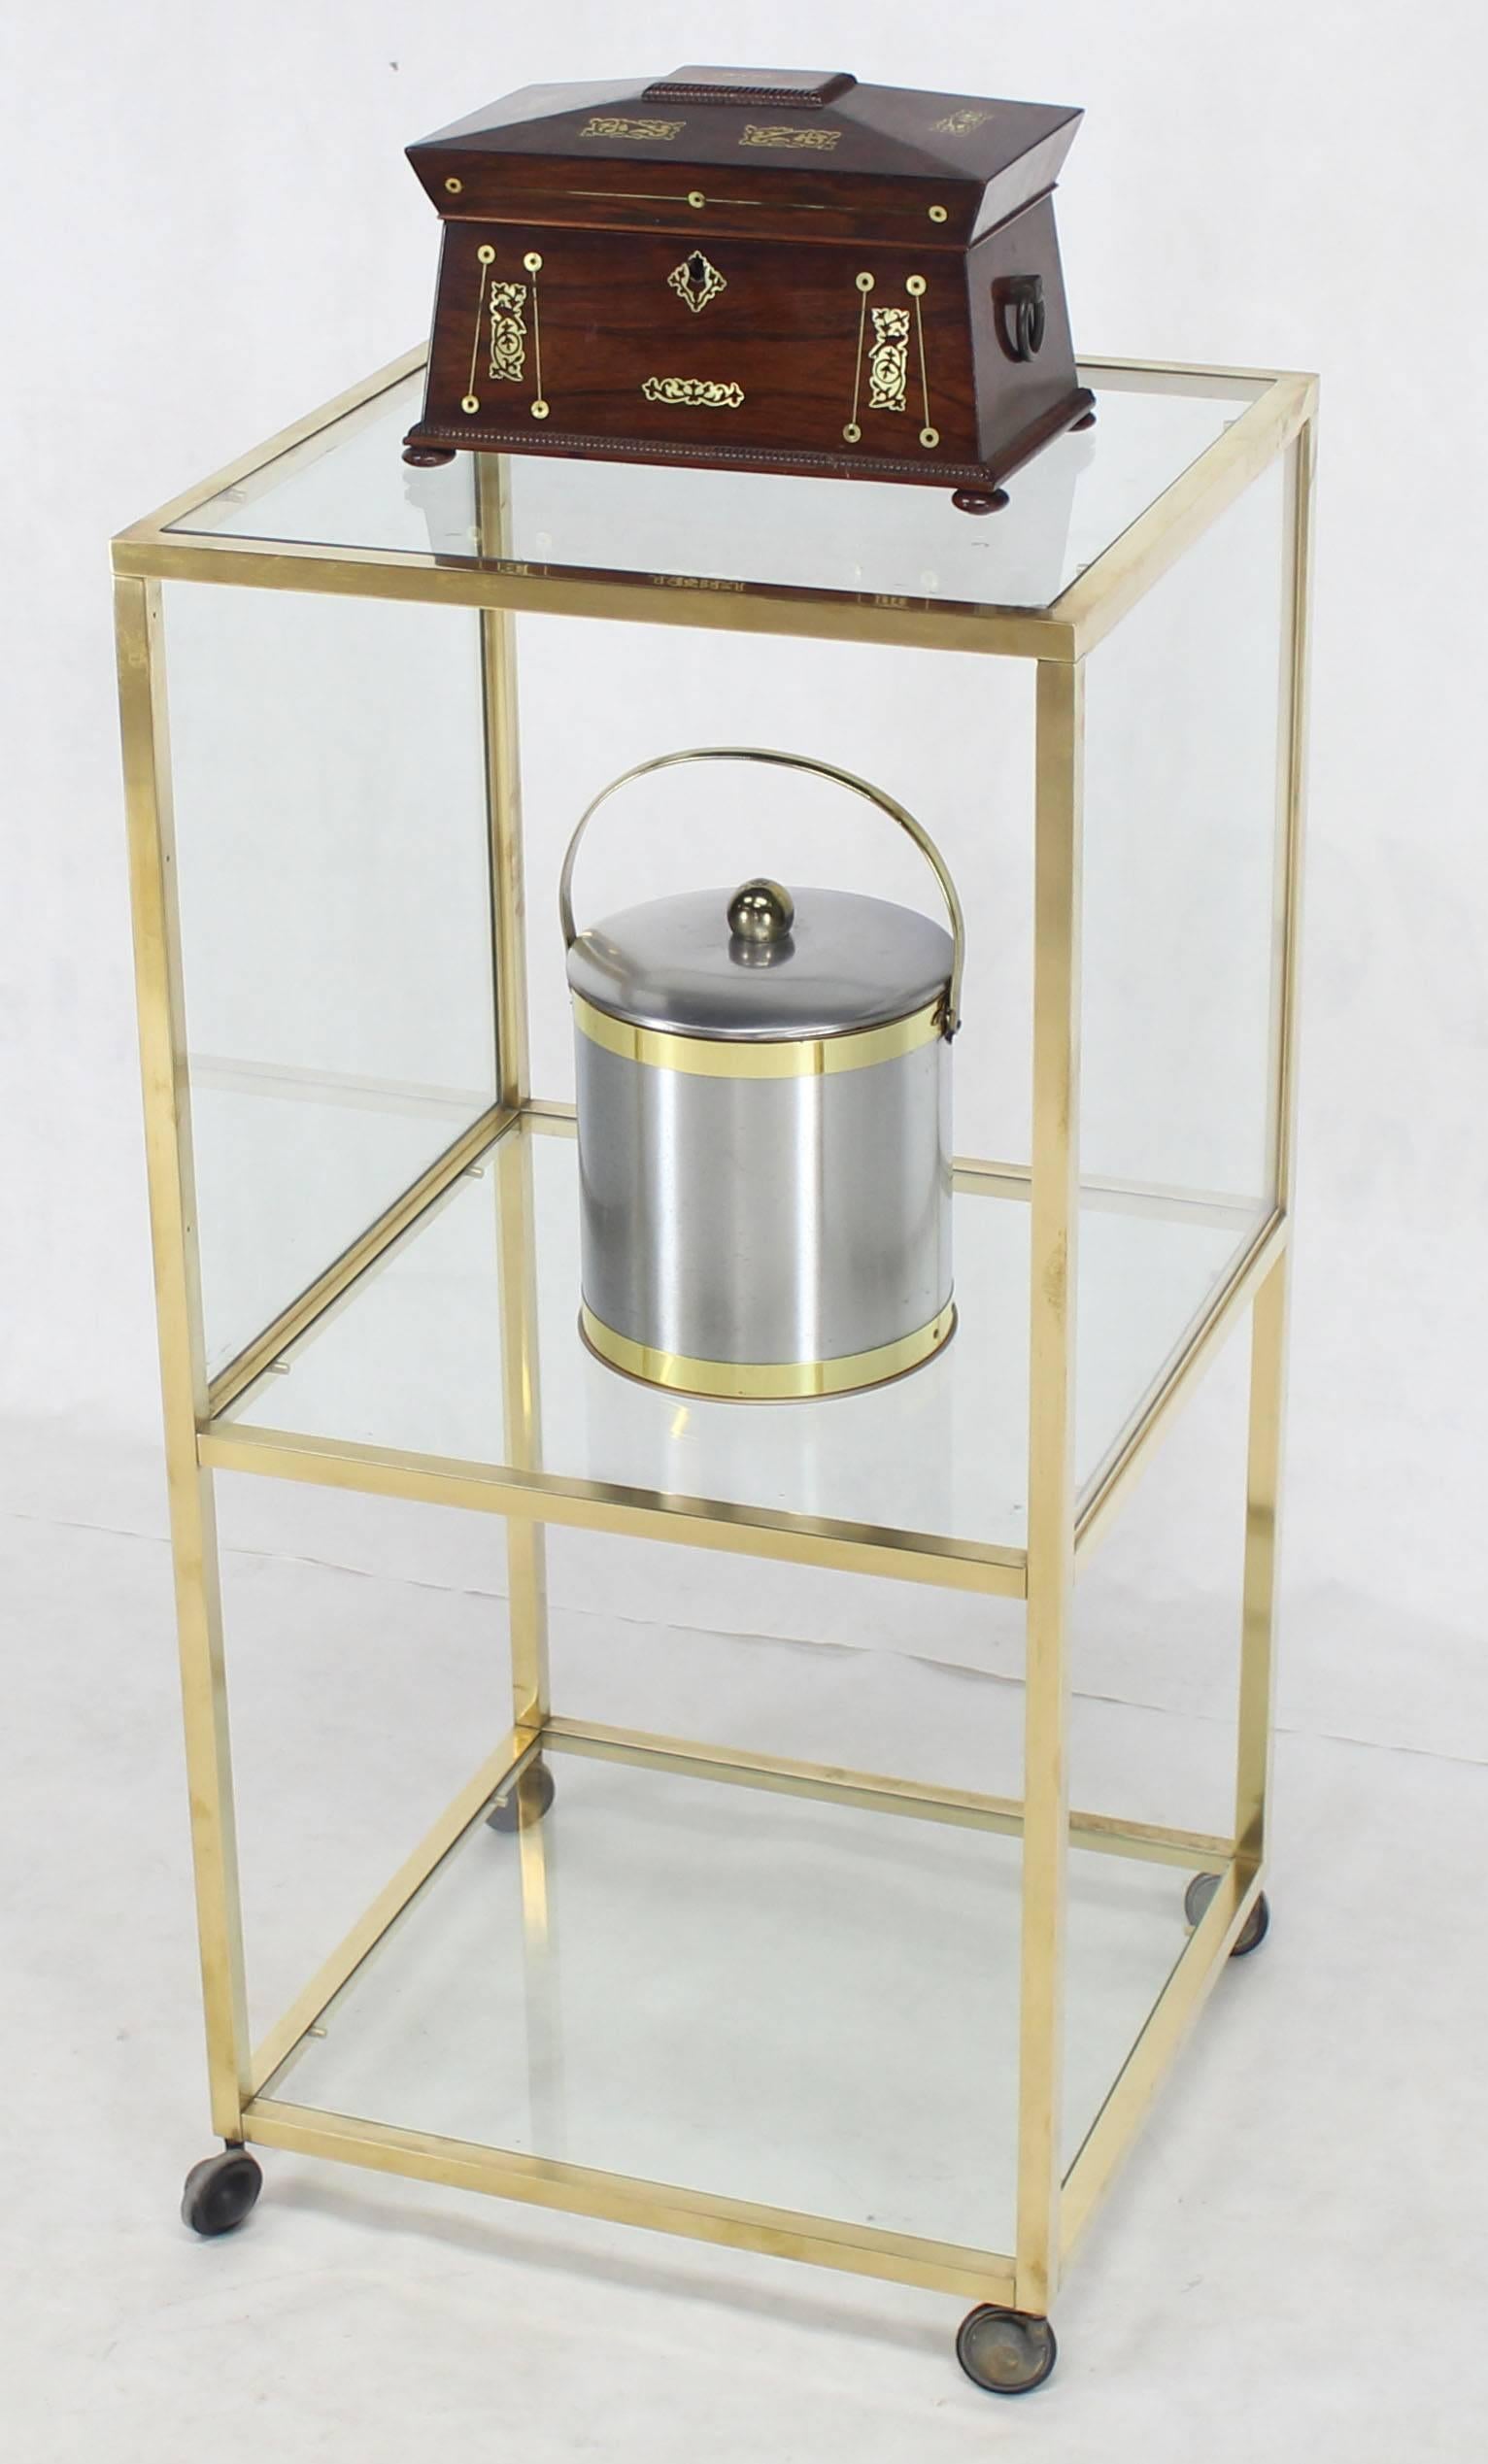 Mid-Century Modern solid brass and glass square double cube design display cart or case. Very nice unusual piece from the Mid-Century Modern era.